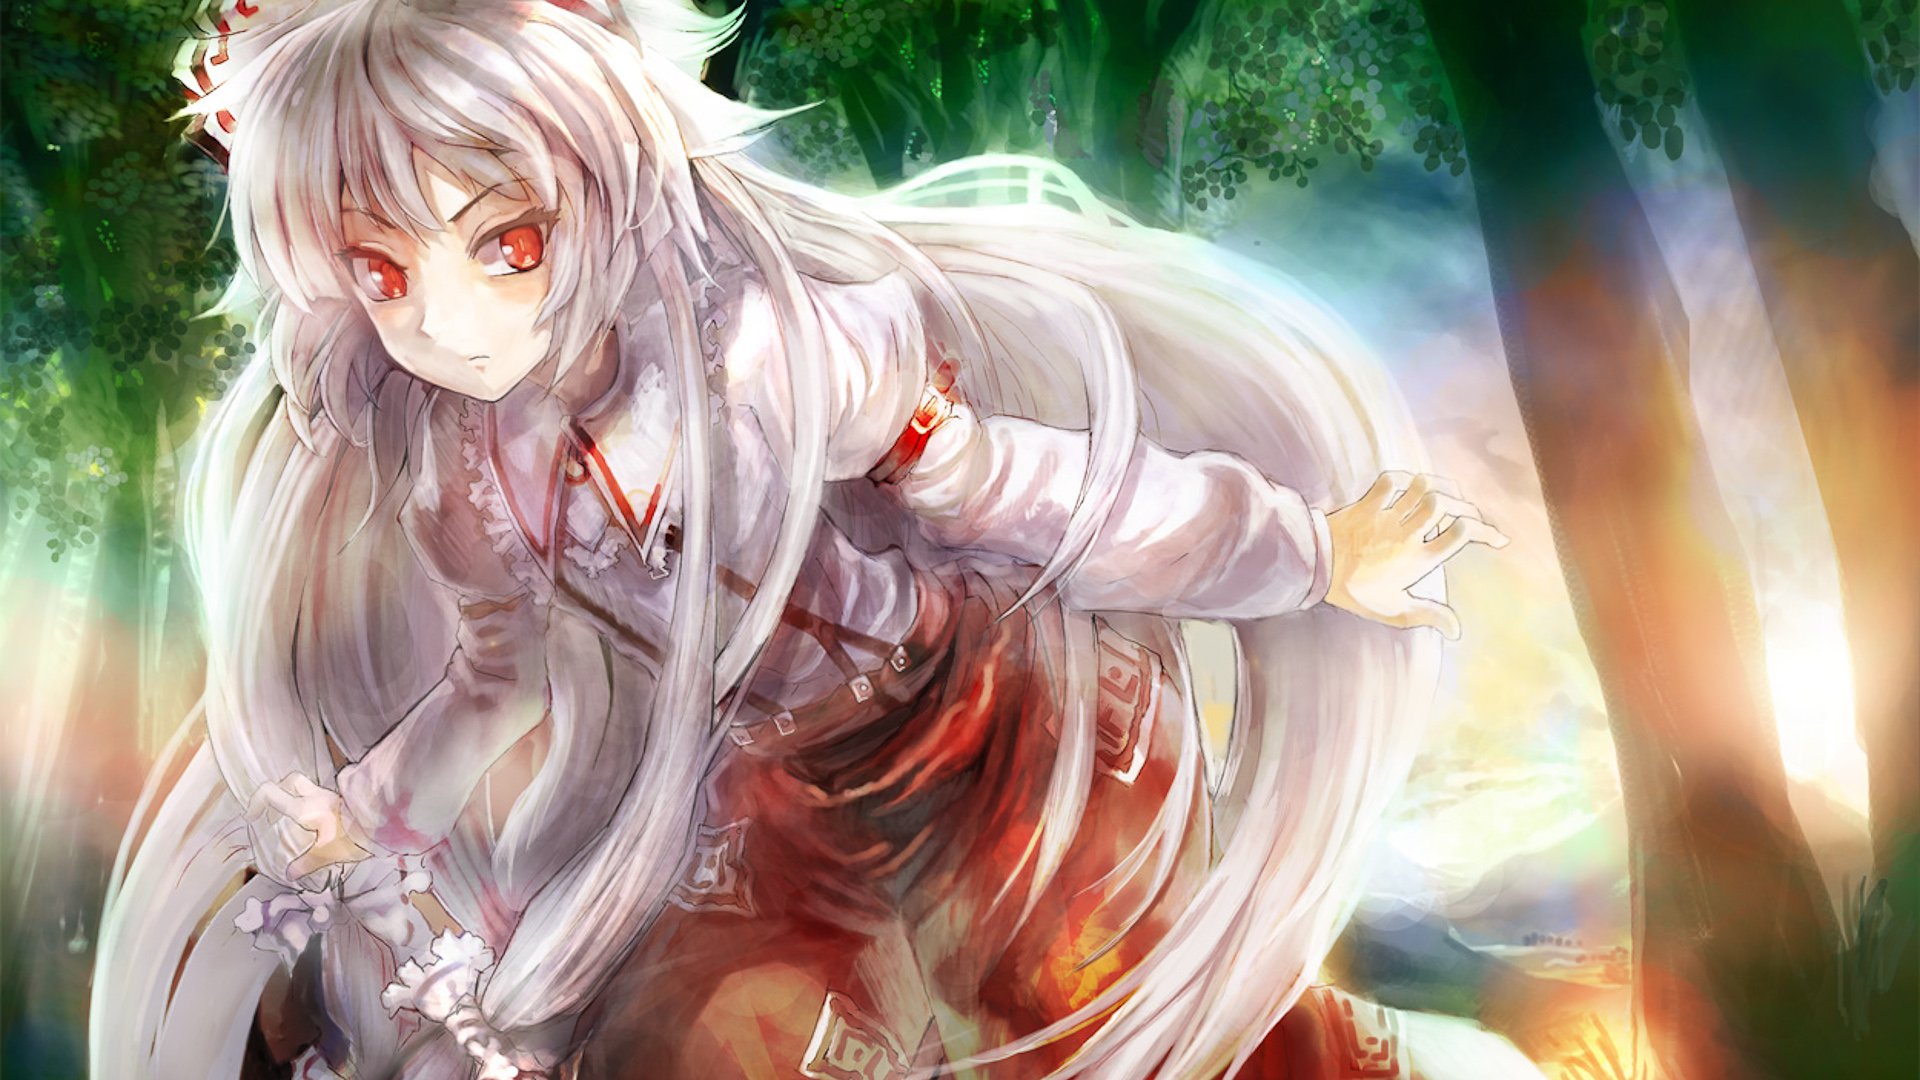 Download Wallpapers, Download 2560x1440 1920x1080 px anime 